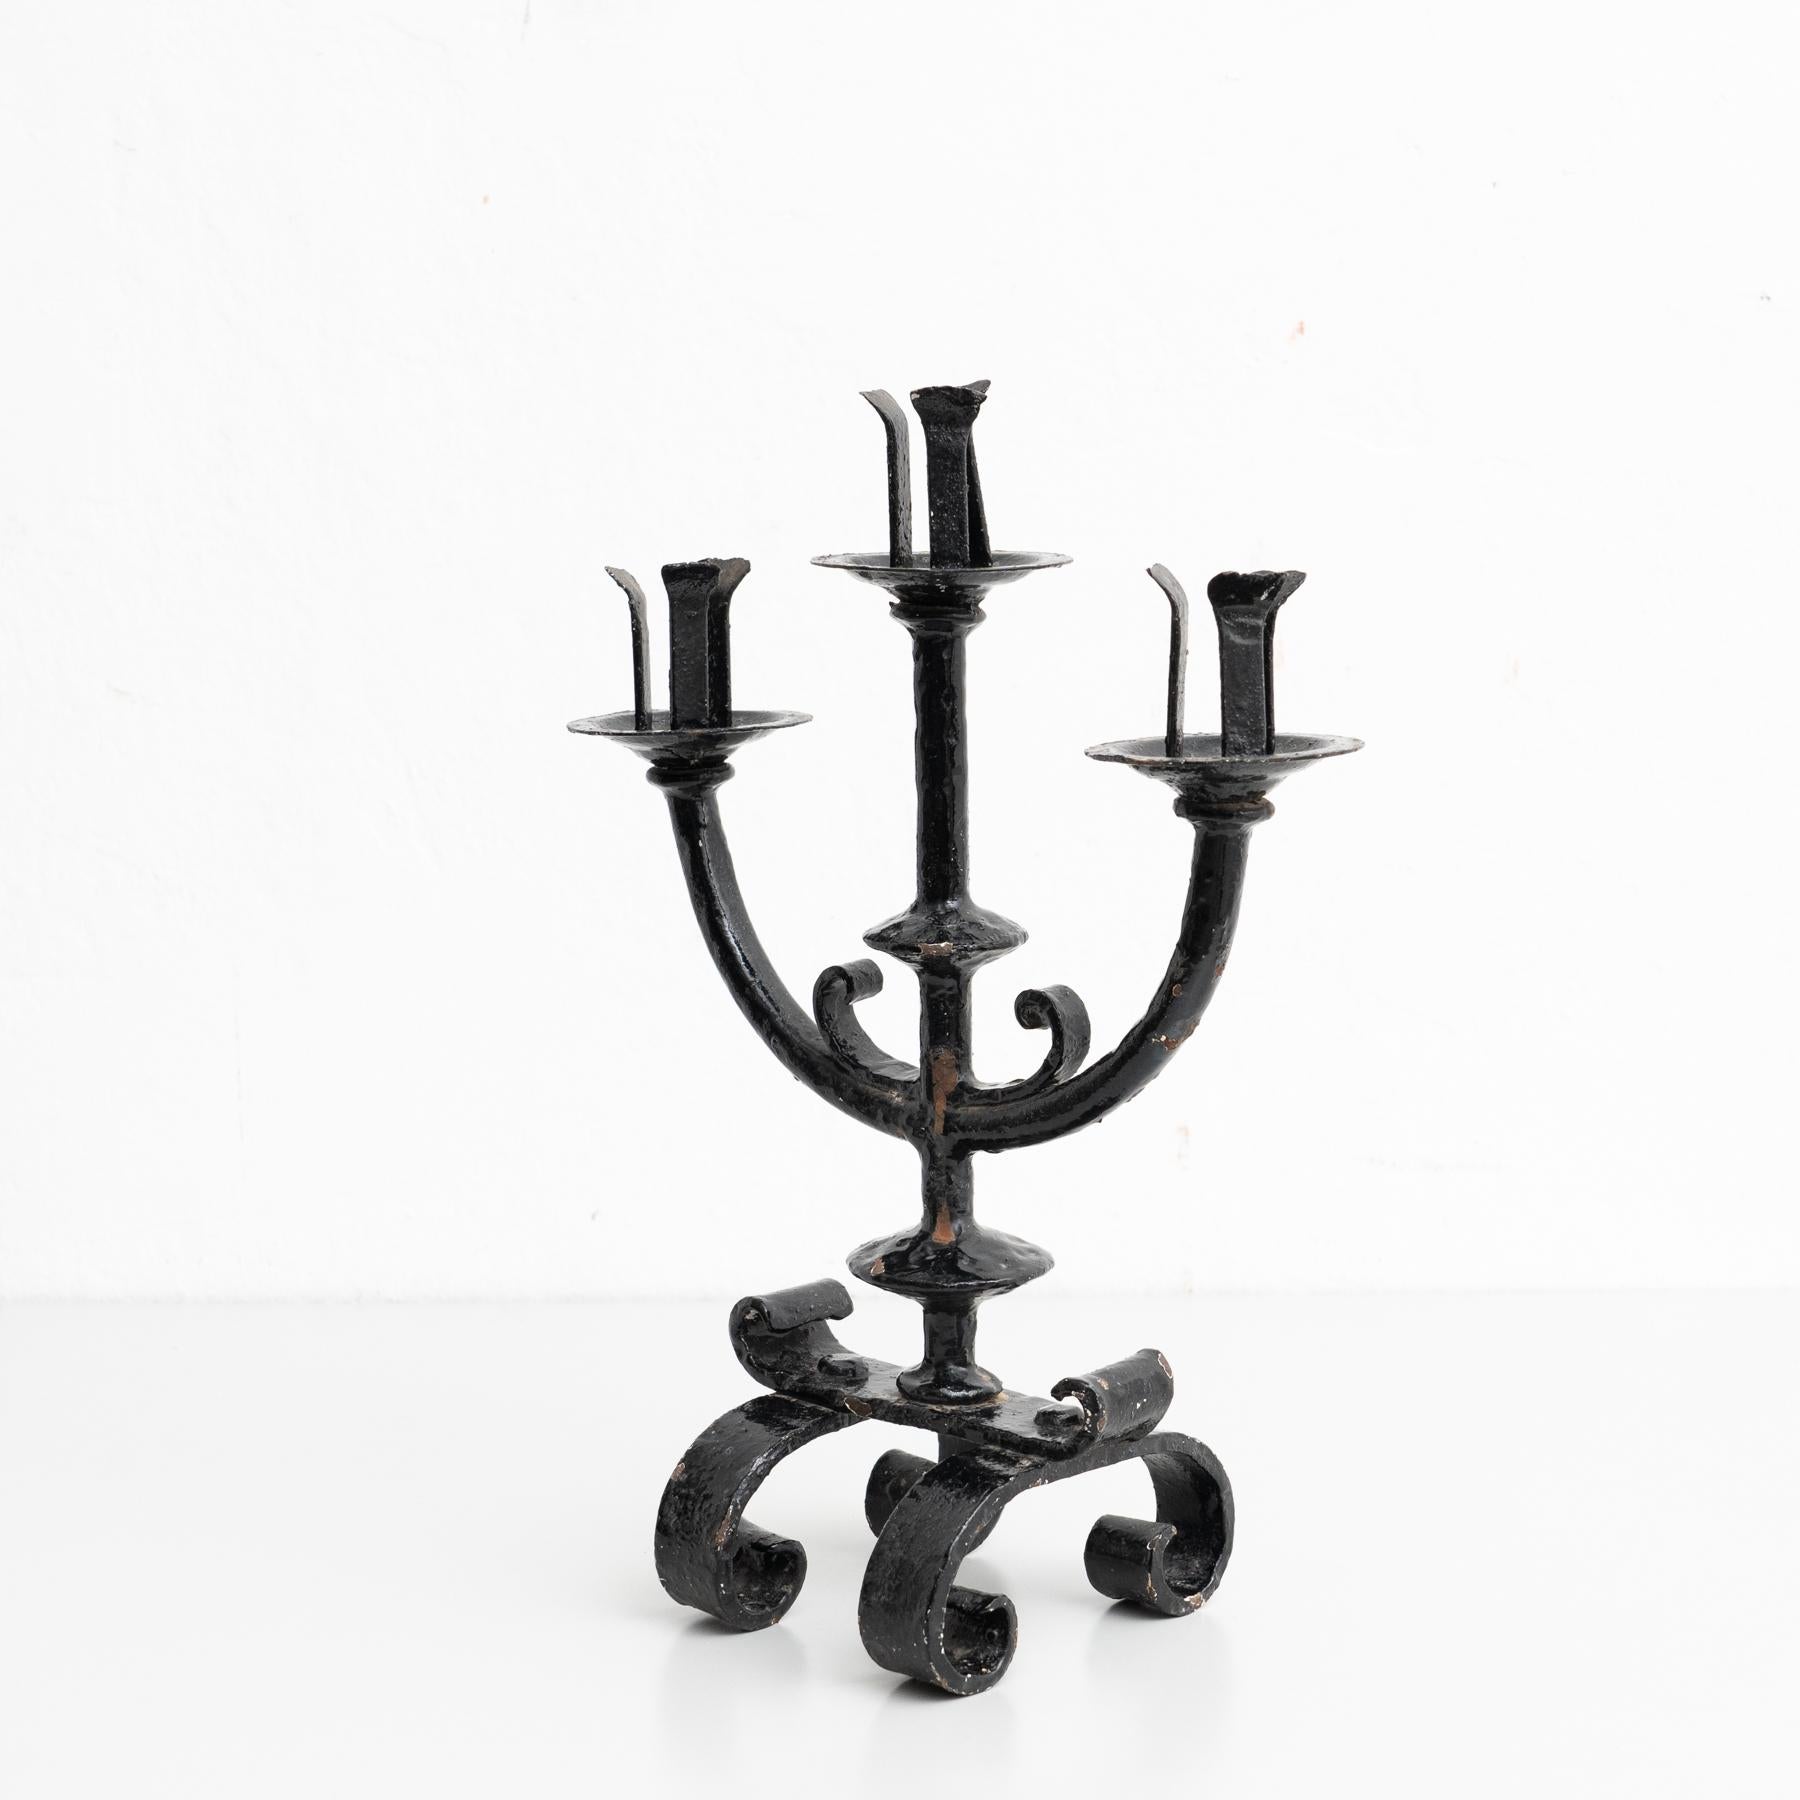 Rustic metal candle holder, circa 1940

Made by unknown manufacturer in Spain.

In original condition, with minor wear consistent with age and use, preserving a beautiful patina.
  
Material:
Metal.

